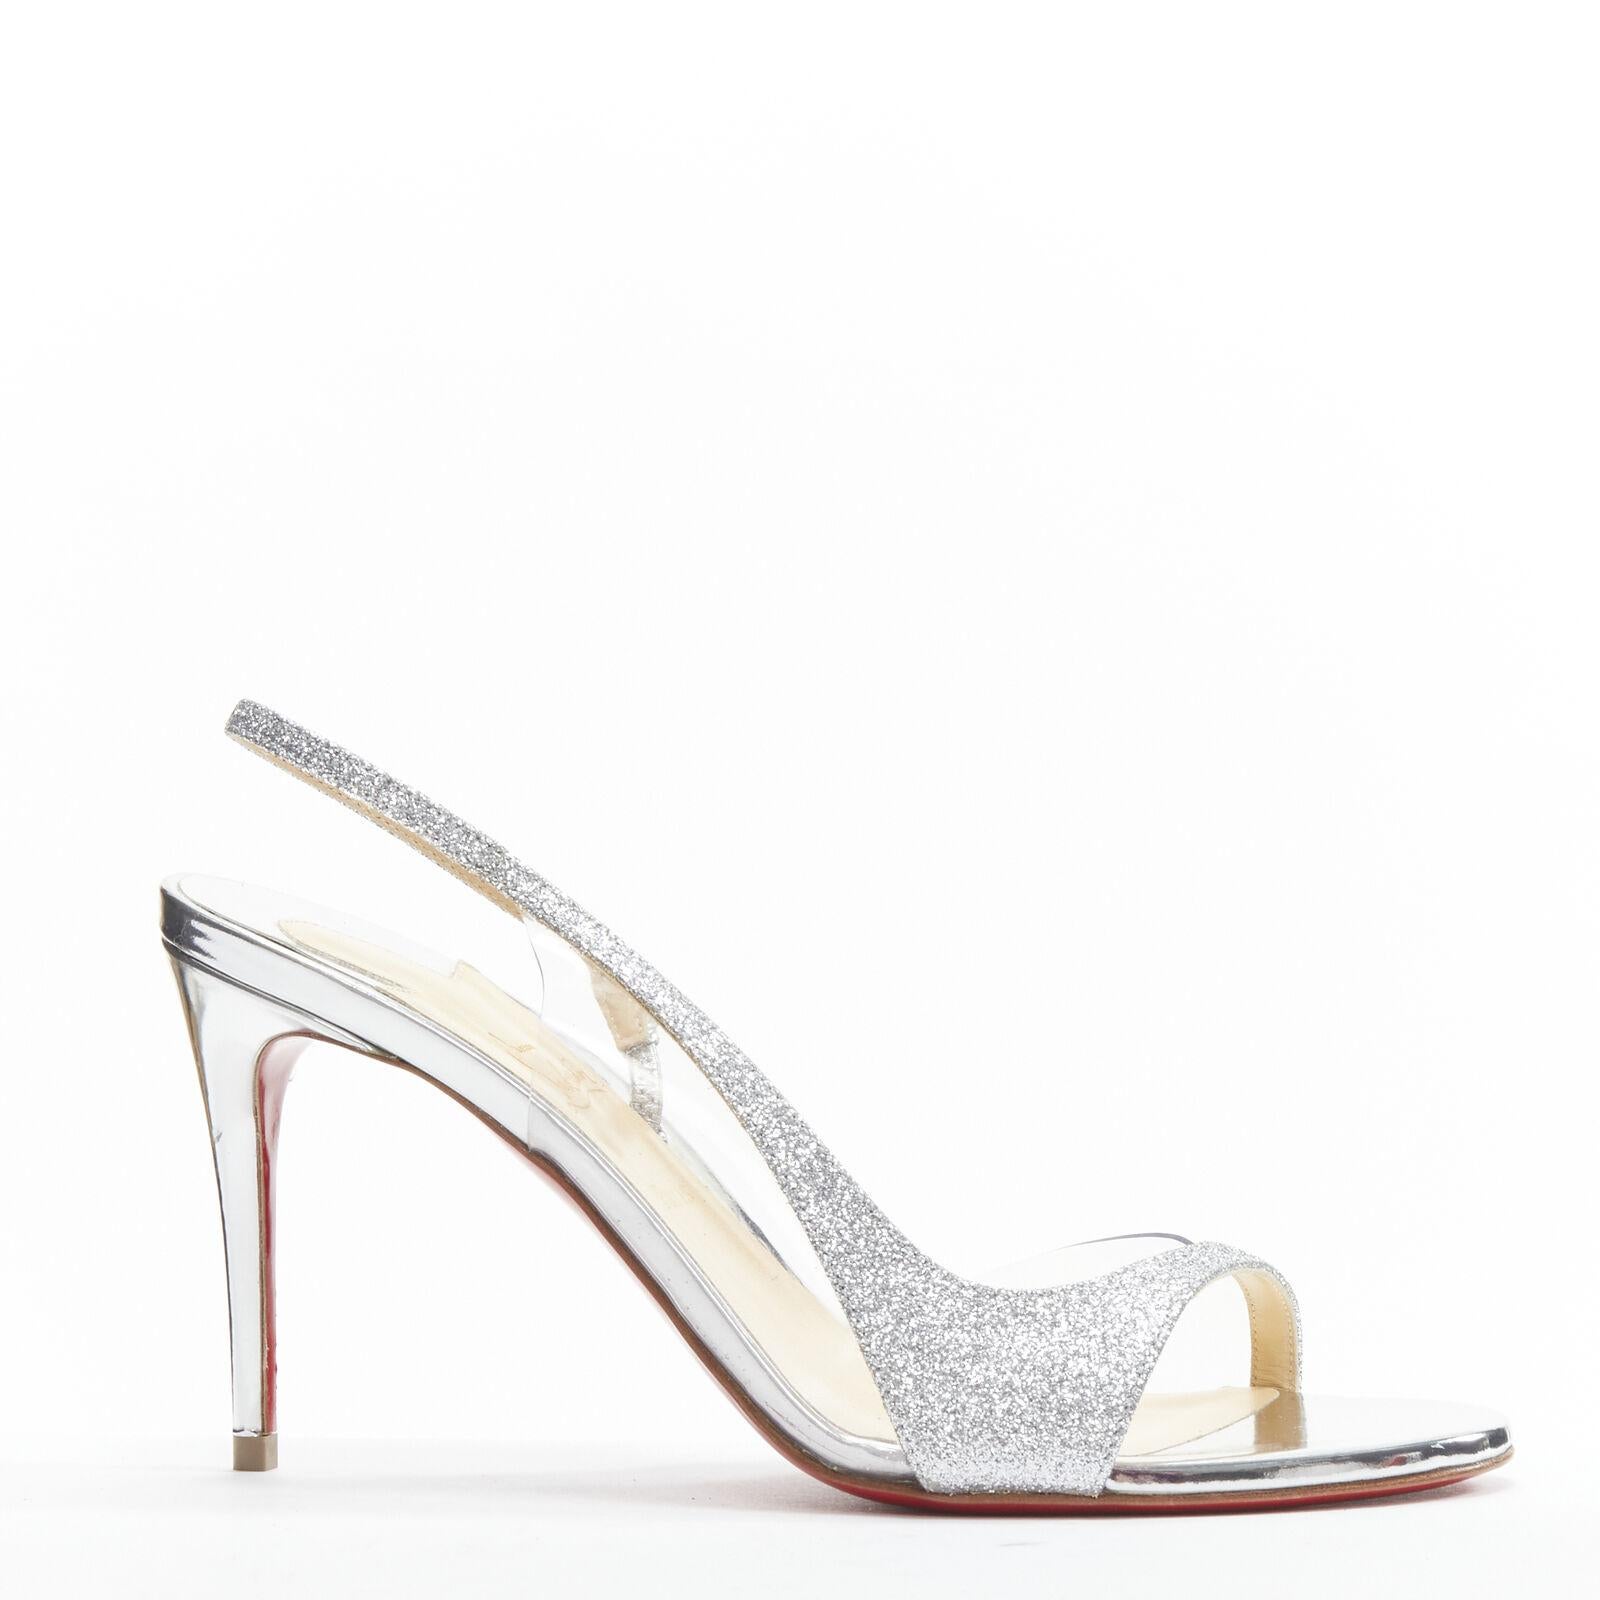 new CHRISTIAN LOUBOUTIN Optisling 85 sillver glitter PVC slingback sandal EU39
Reference: TGAS/C01483
Brand: Christian Louboutin
Model: Optisling 80
Material: Calfskin Leather
Color: Silver
Pattern: Solid
Closure: Slingback
Lining: Leather
Extra